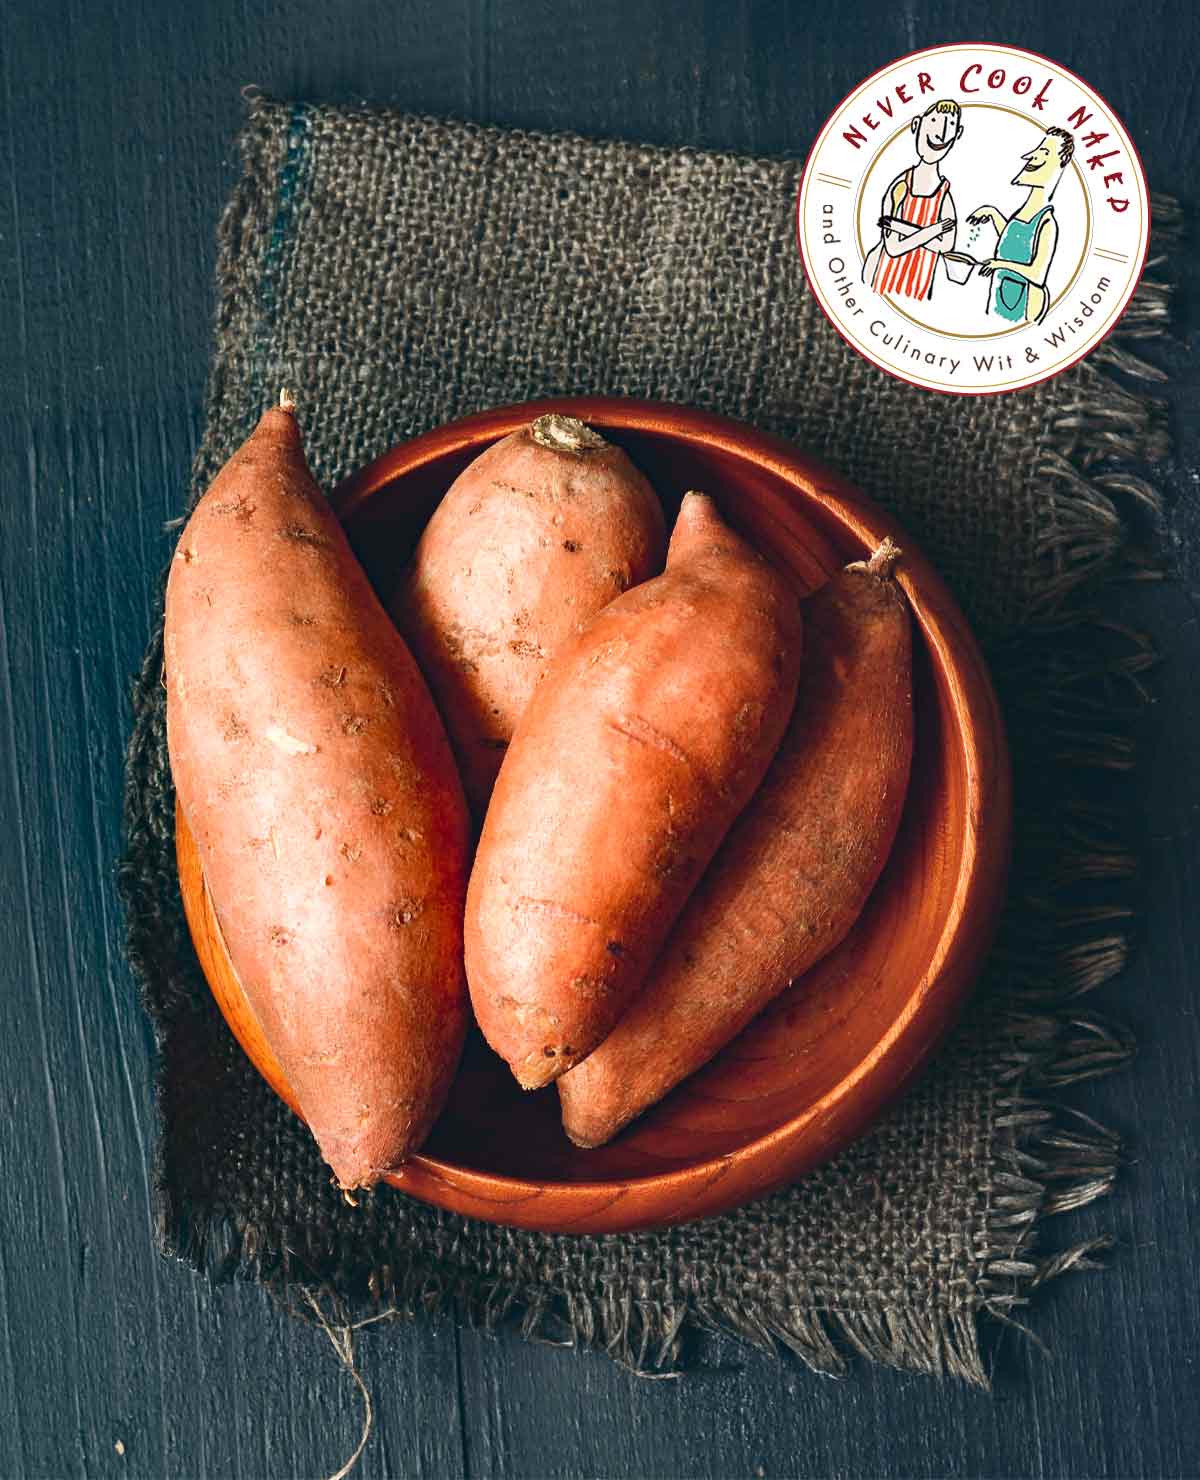 Four sweet potatoes in a wooden bowl on a piece of burlap.